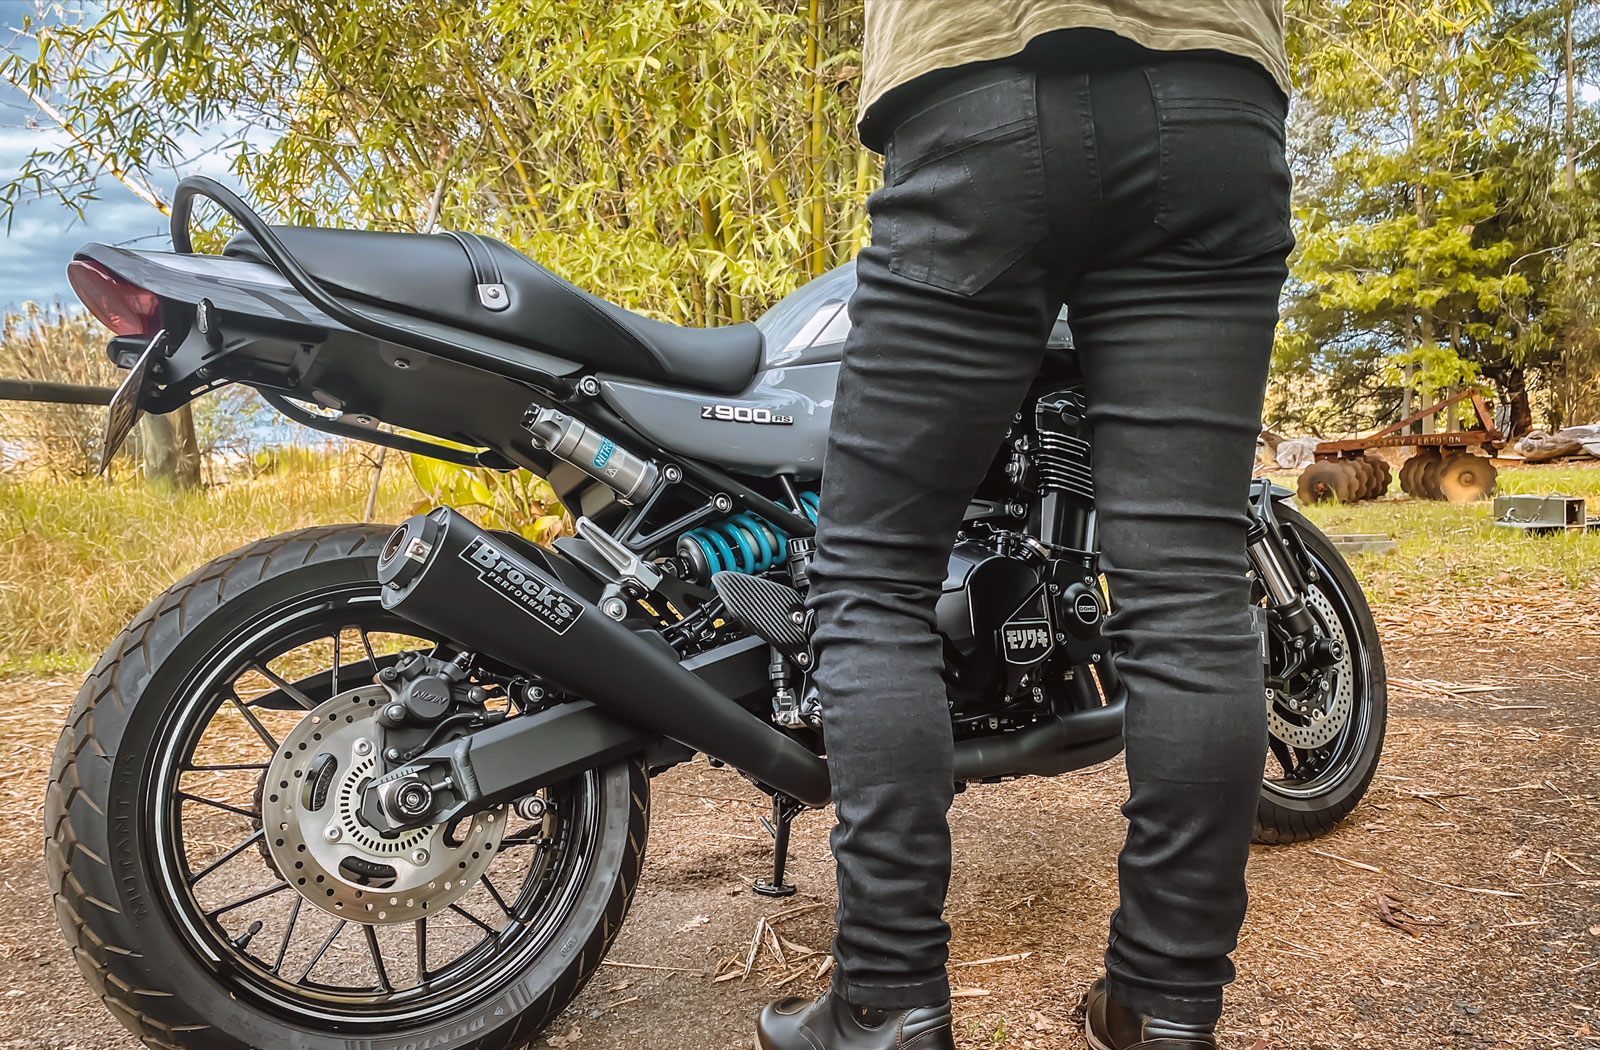 Akin Stealth motorcycle jeans